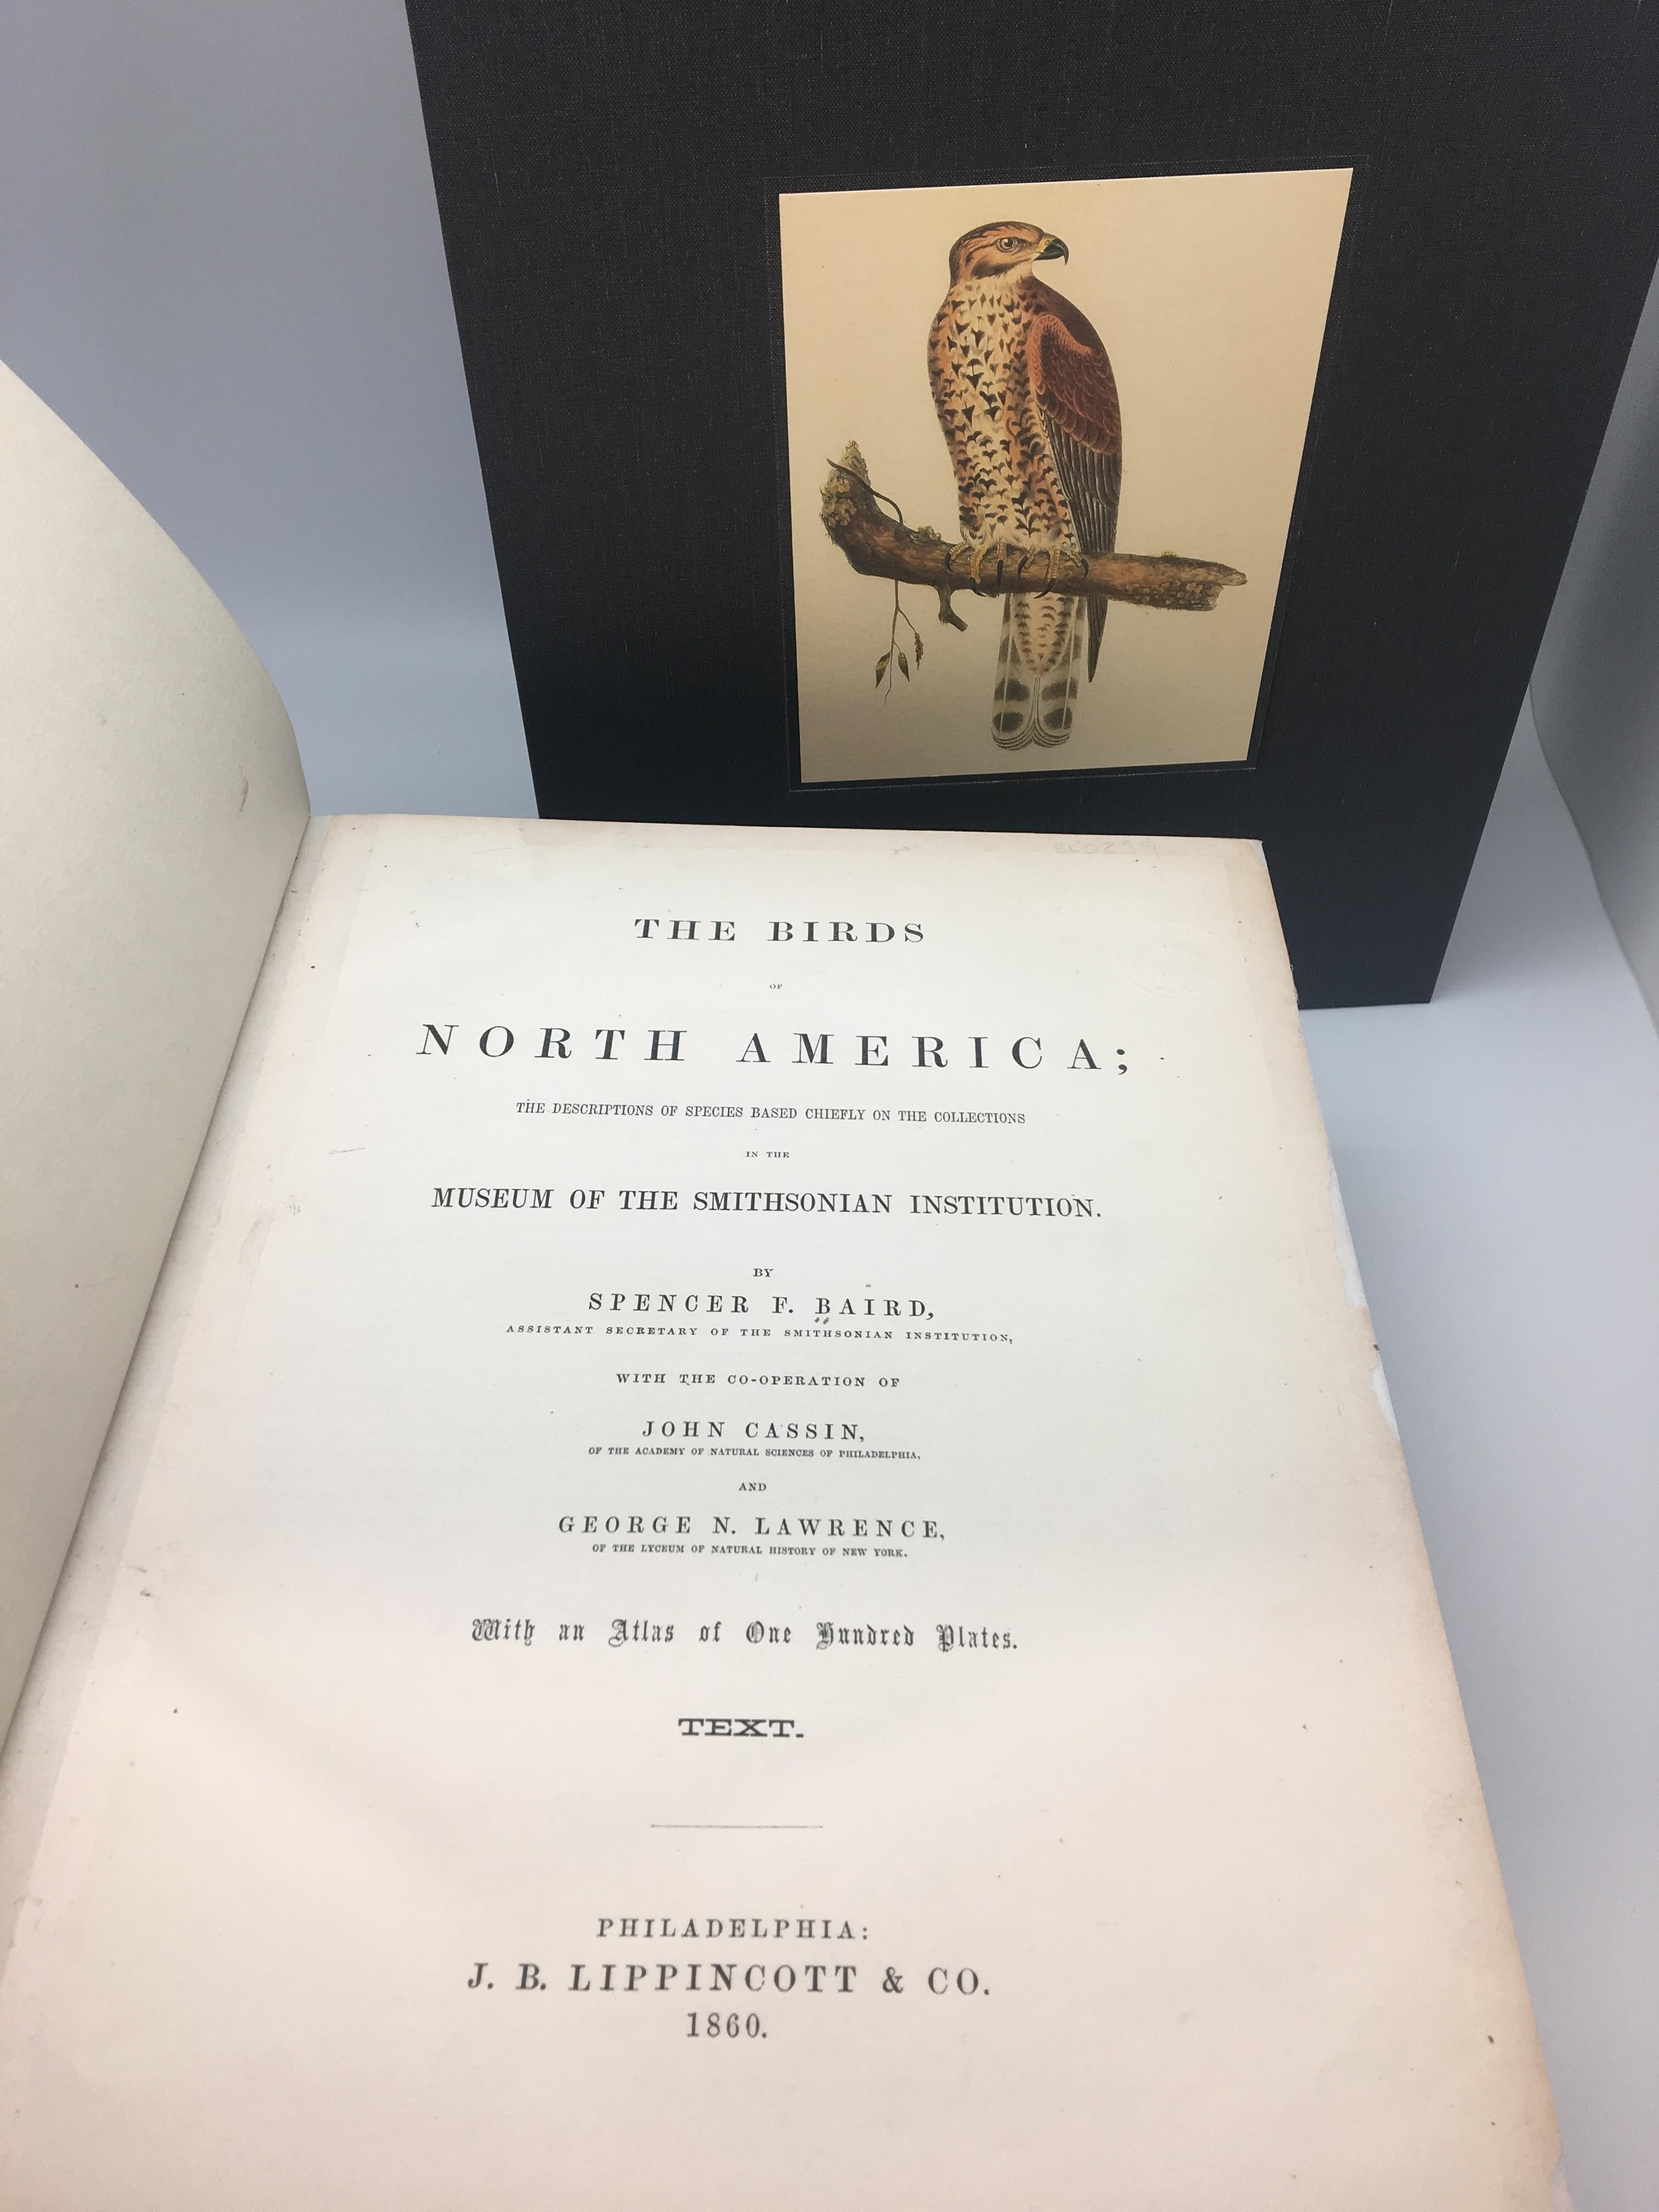 Baird, Spencer Fullerton. The Birds of North America; the descriptions of species based chiefly on the collections in the museum of the Smithsonian Institution by Spencer Fullerton Baird with the co-operation of John Cassin and George Lawrence.